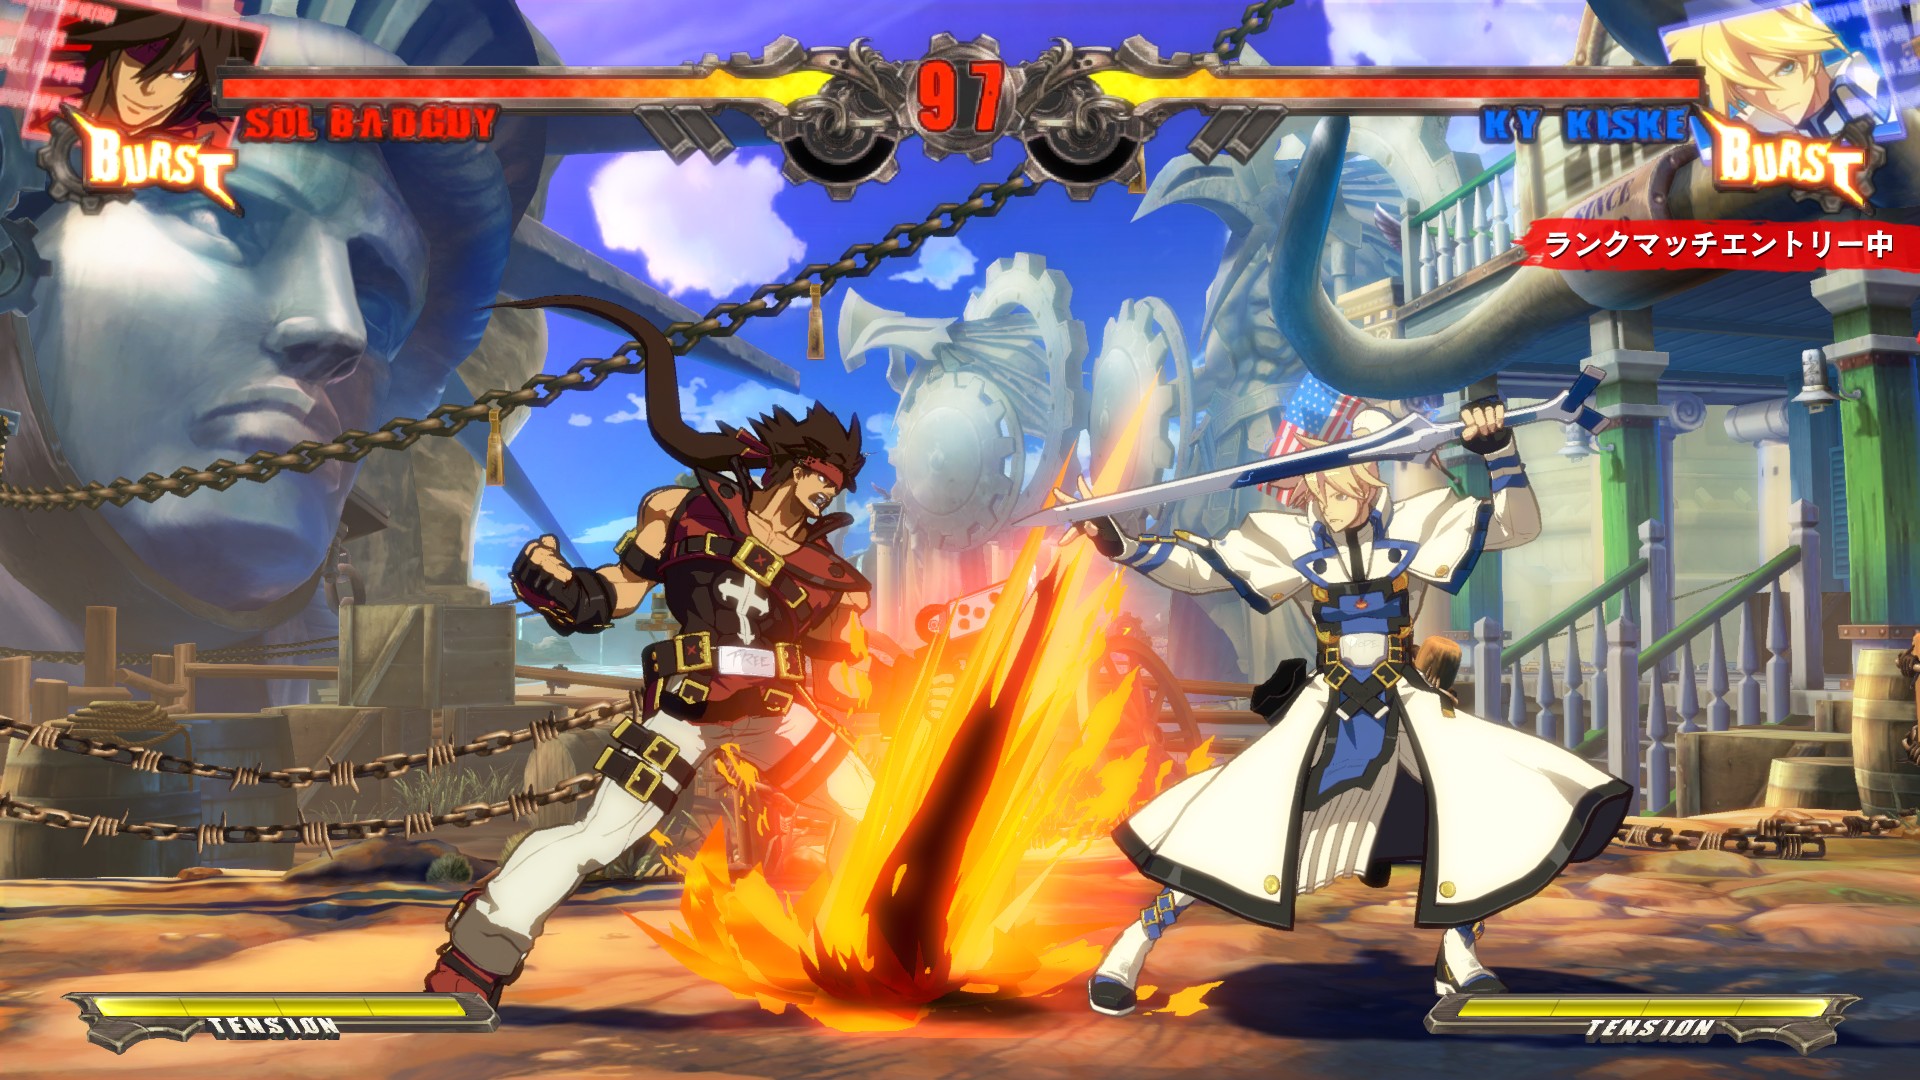 Up to Eight Players can Brawl and Mingle Together Online in Guilty Gear Xrd: Sign